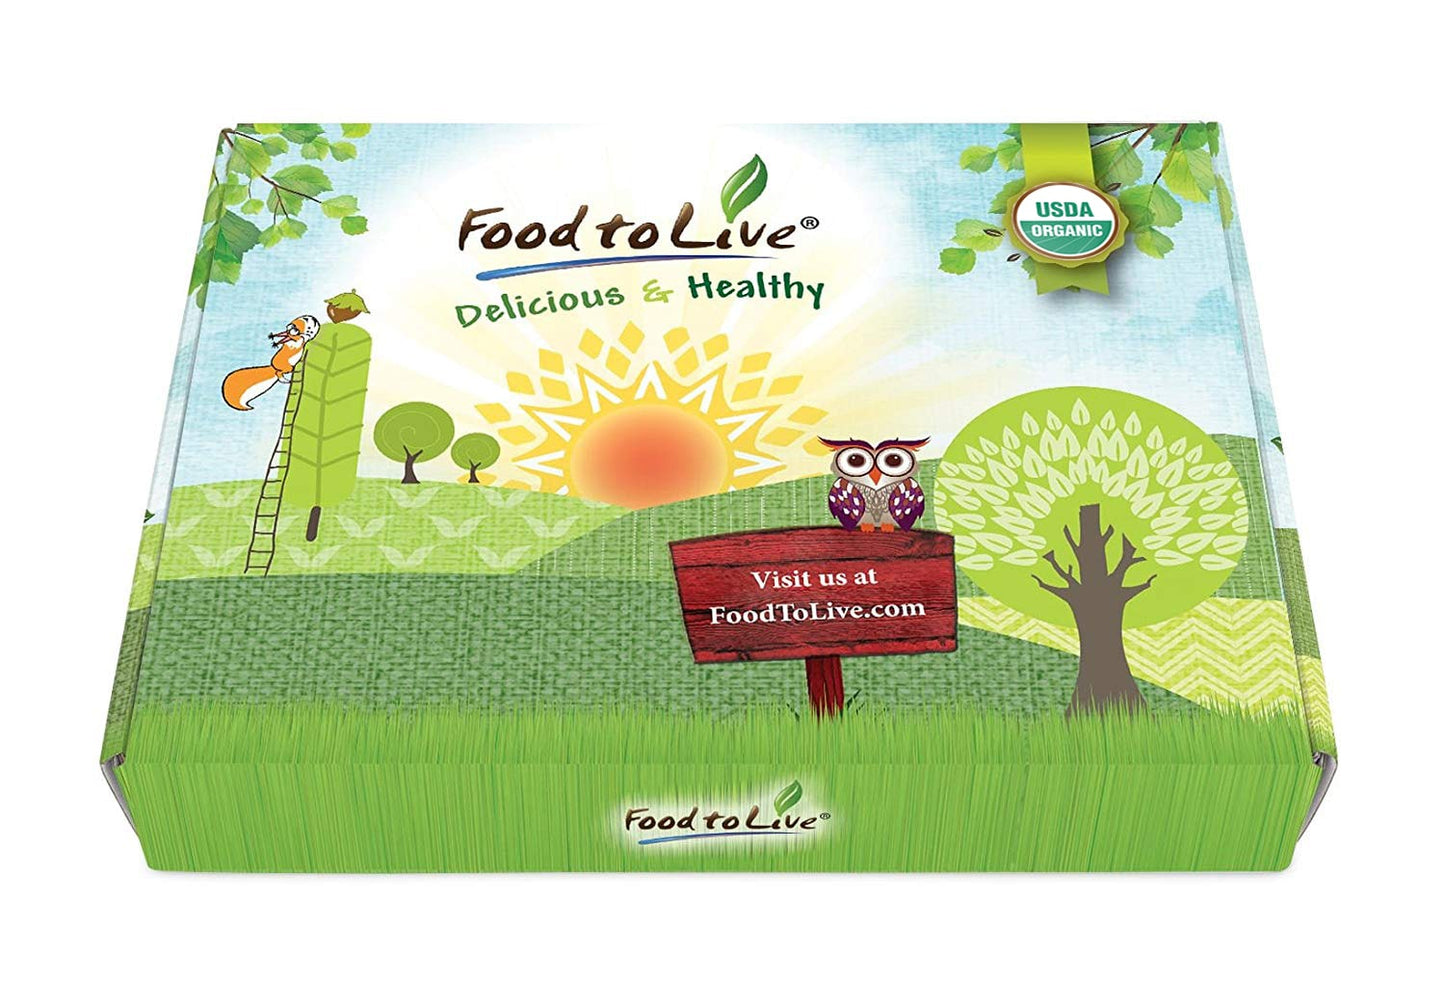 Organic Nuts & Seeds in a Gift Box - A Variety Pack of Almonds, Walnuts, Sunflower Seeds, Pumpkin Seeds, and Hemp Seeds - by Food to Live